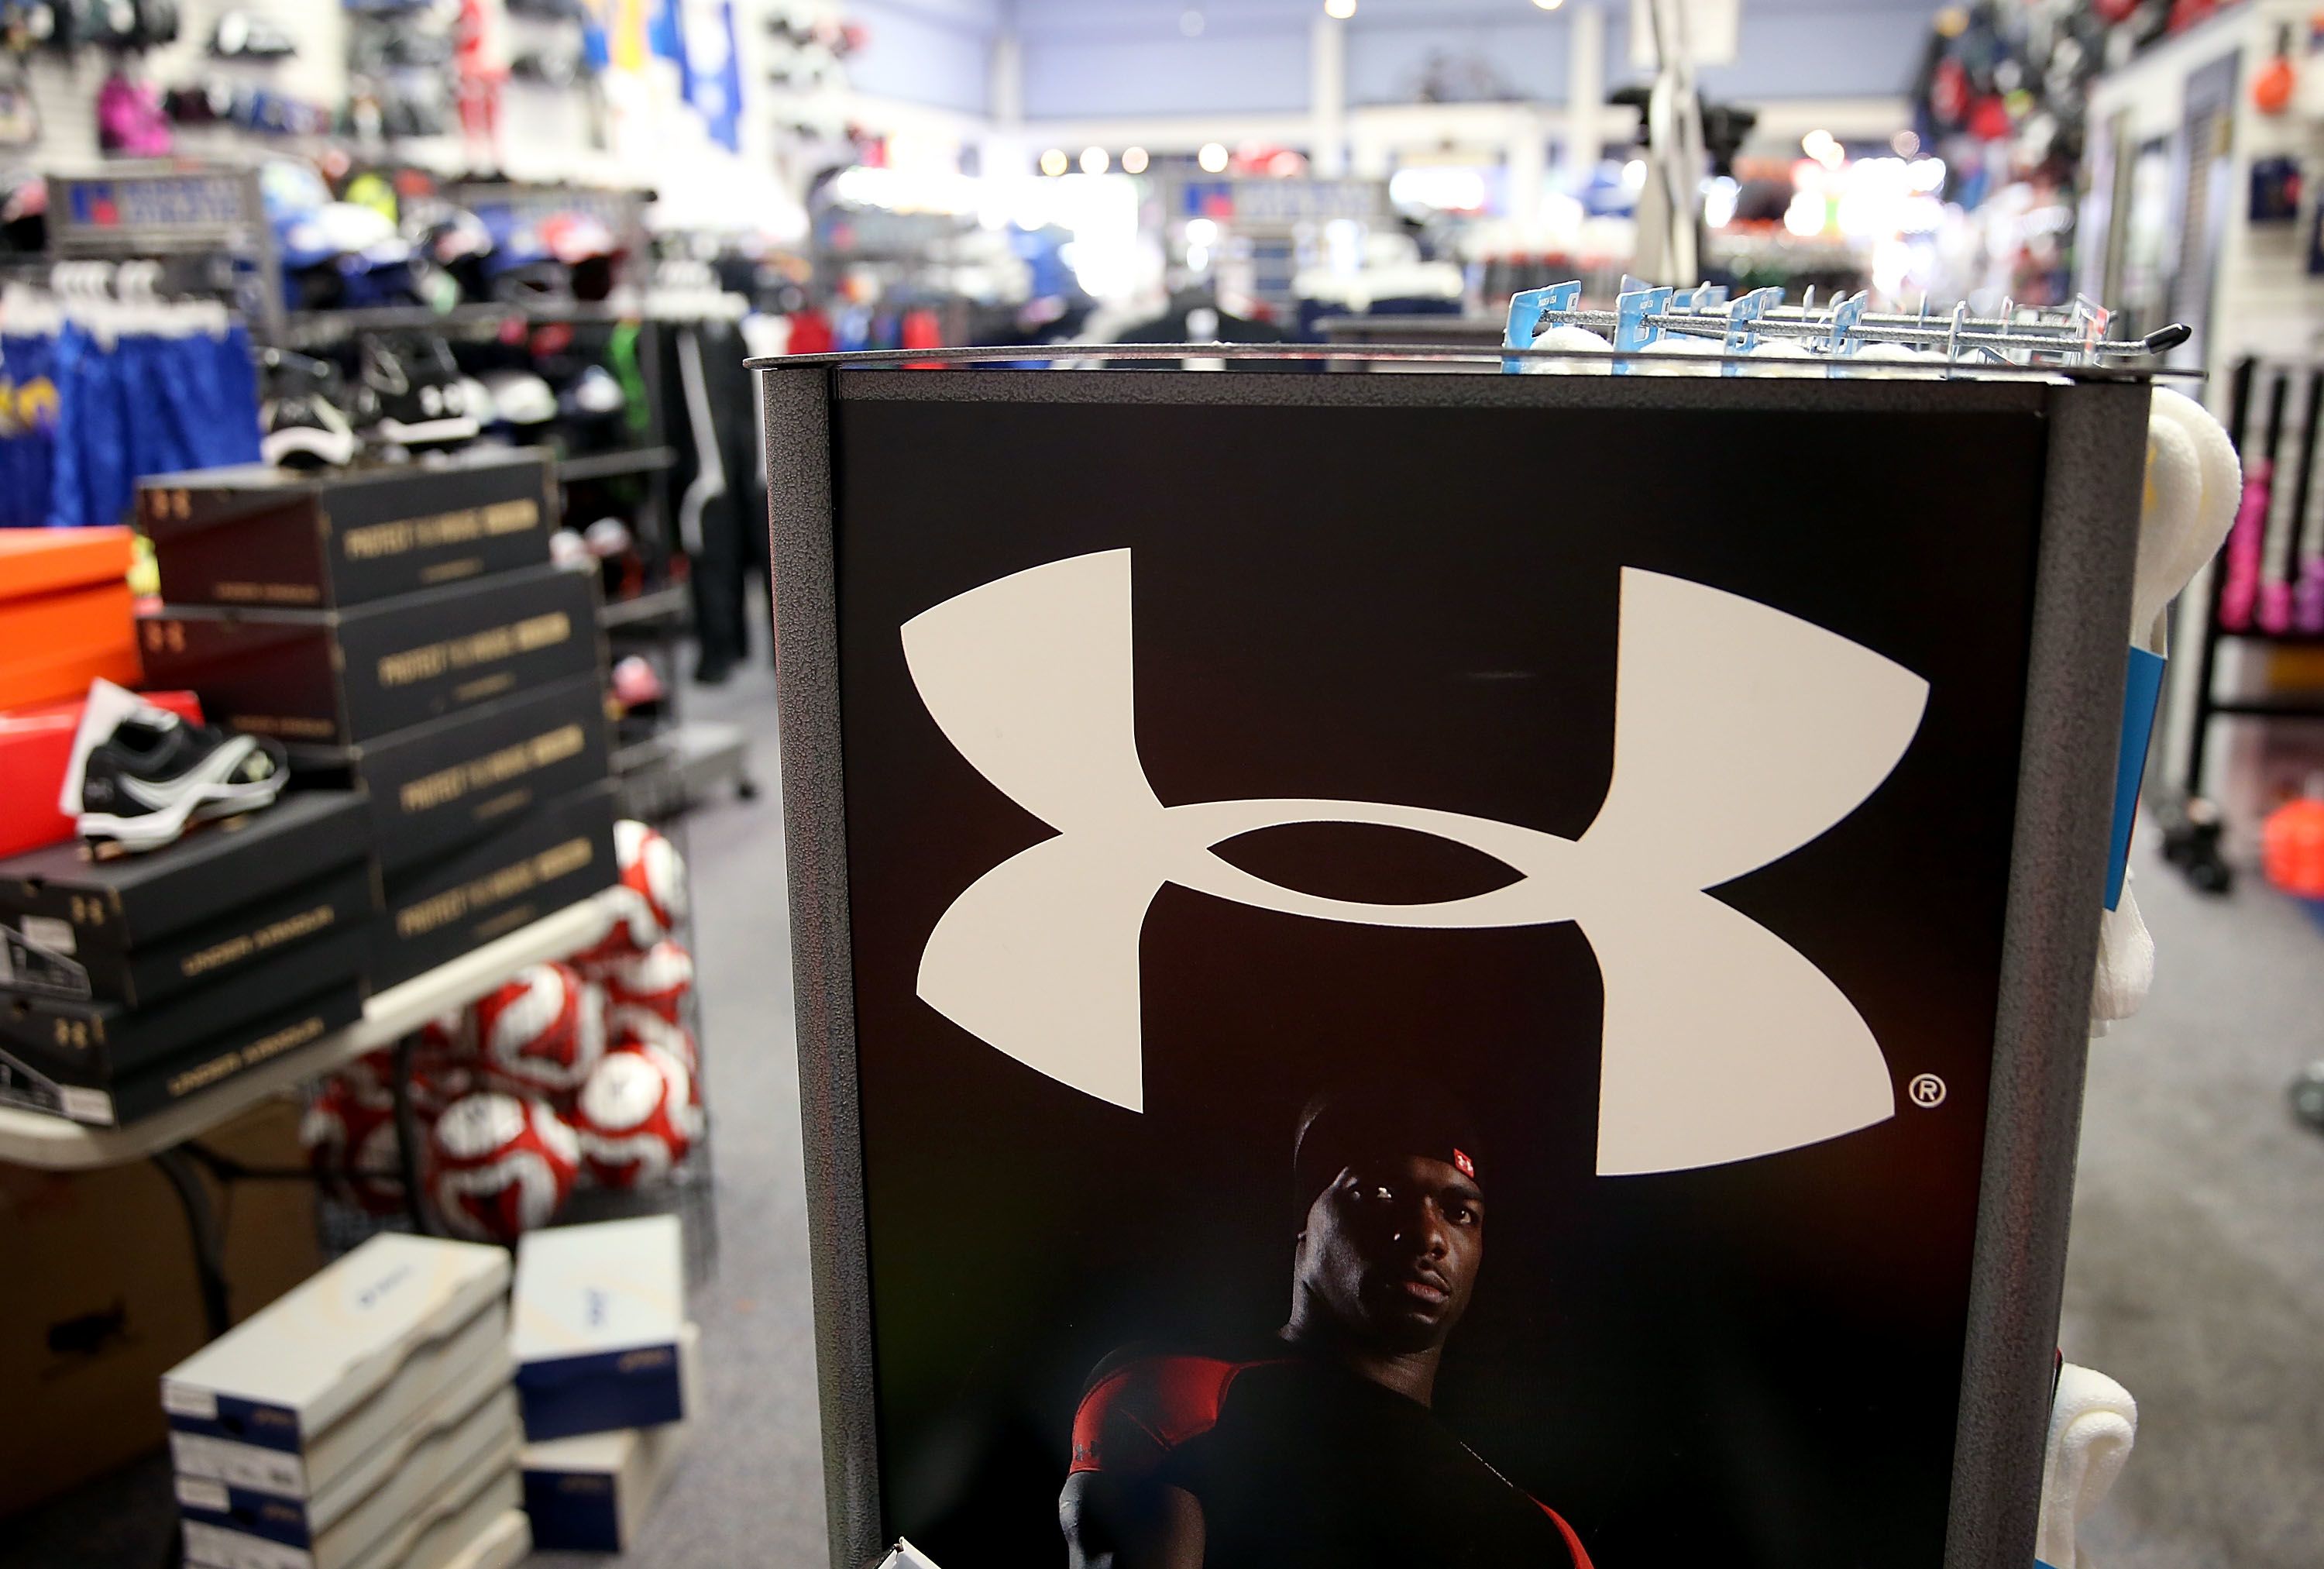 Under Armour tells Journal report on culture was read' | Business